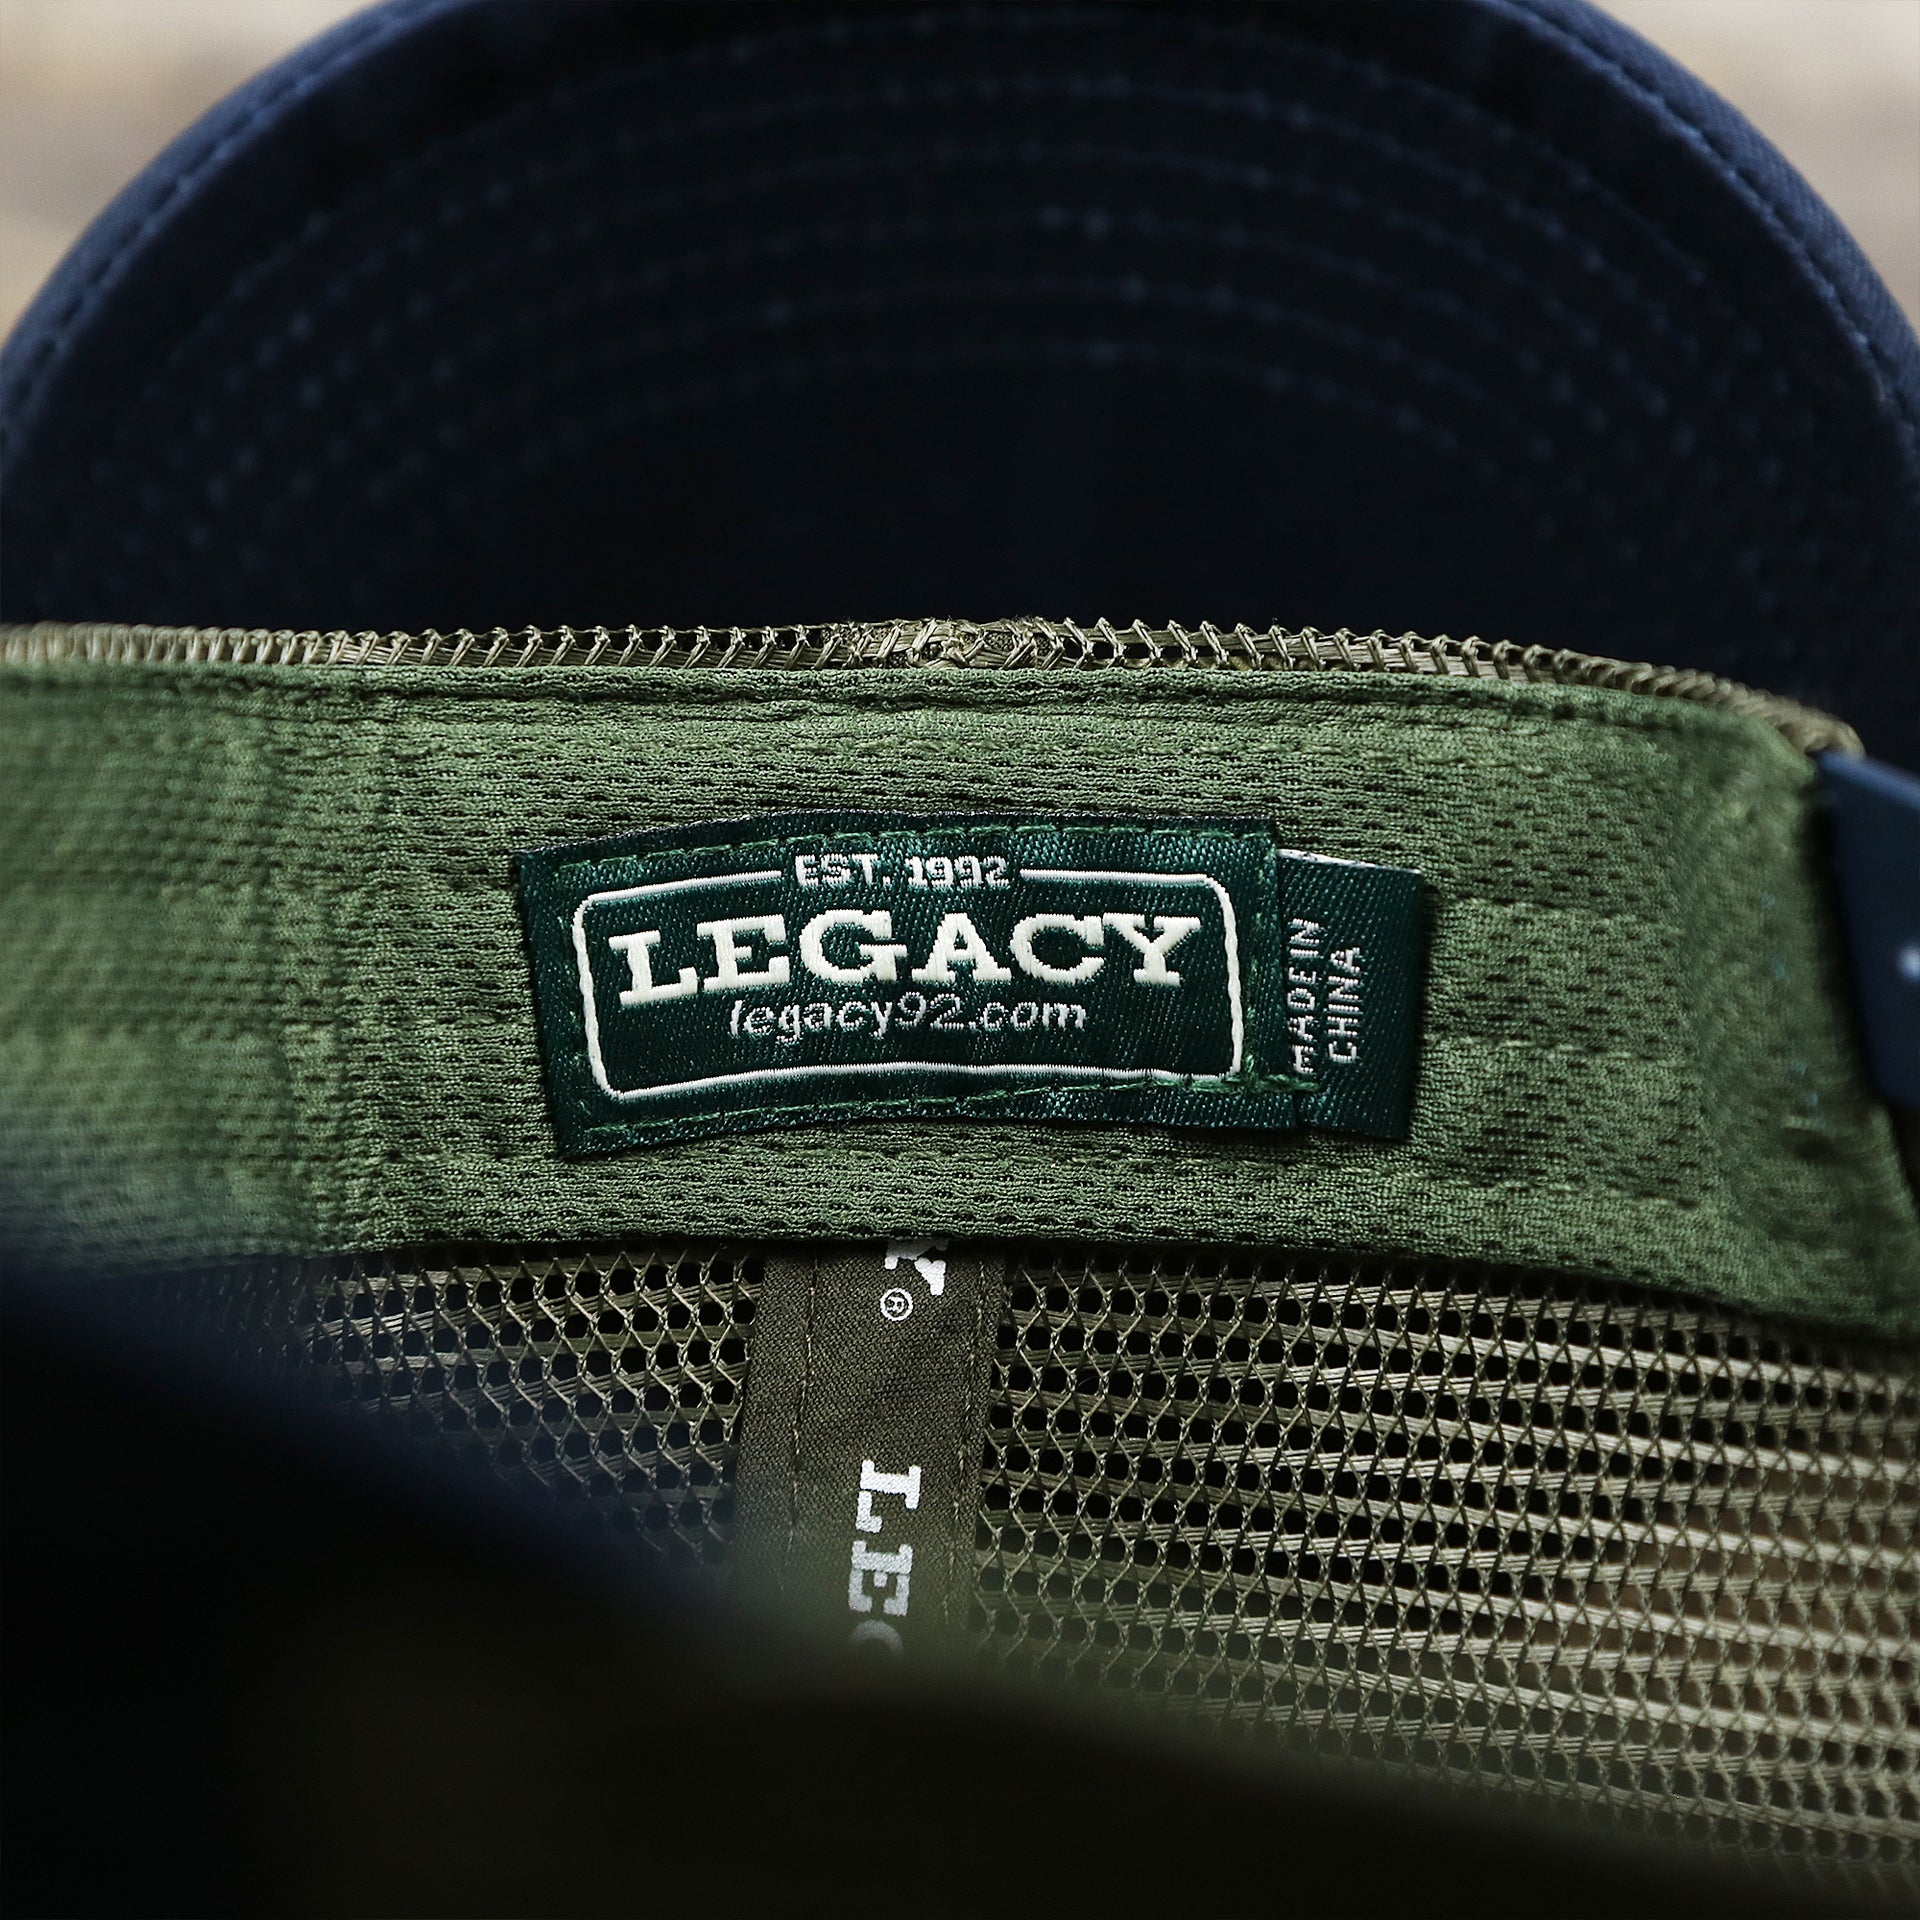 The Legacy Tag on the New Jersey Ocean City Sunset Mesh Back Trucker Hat | Navy Blue And Olive Mesh Trucker Hat